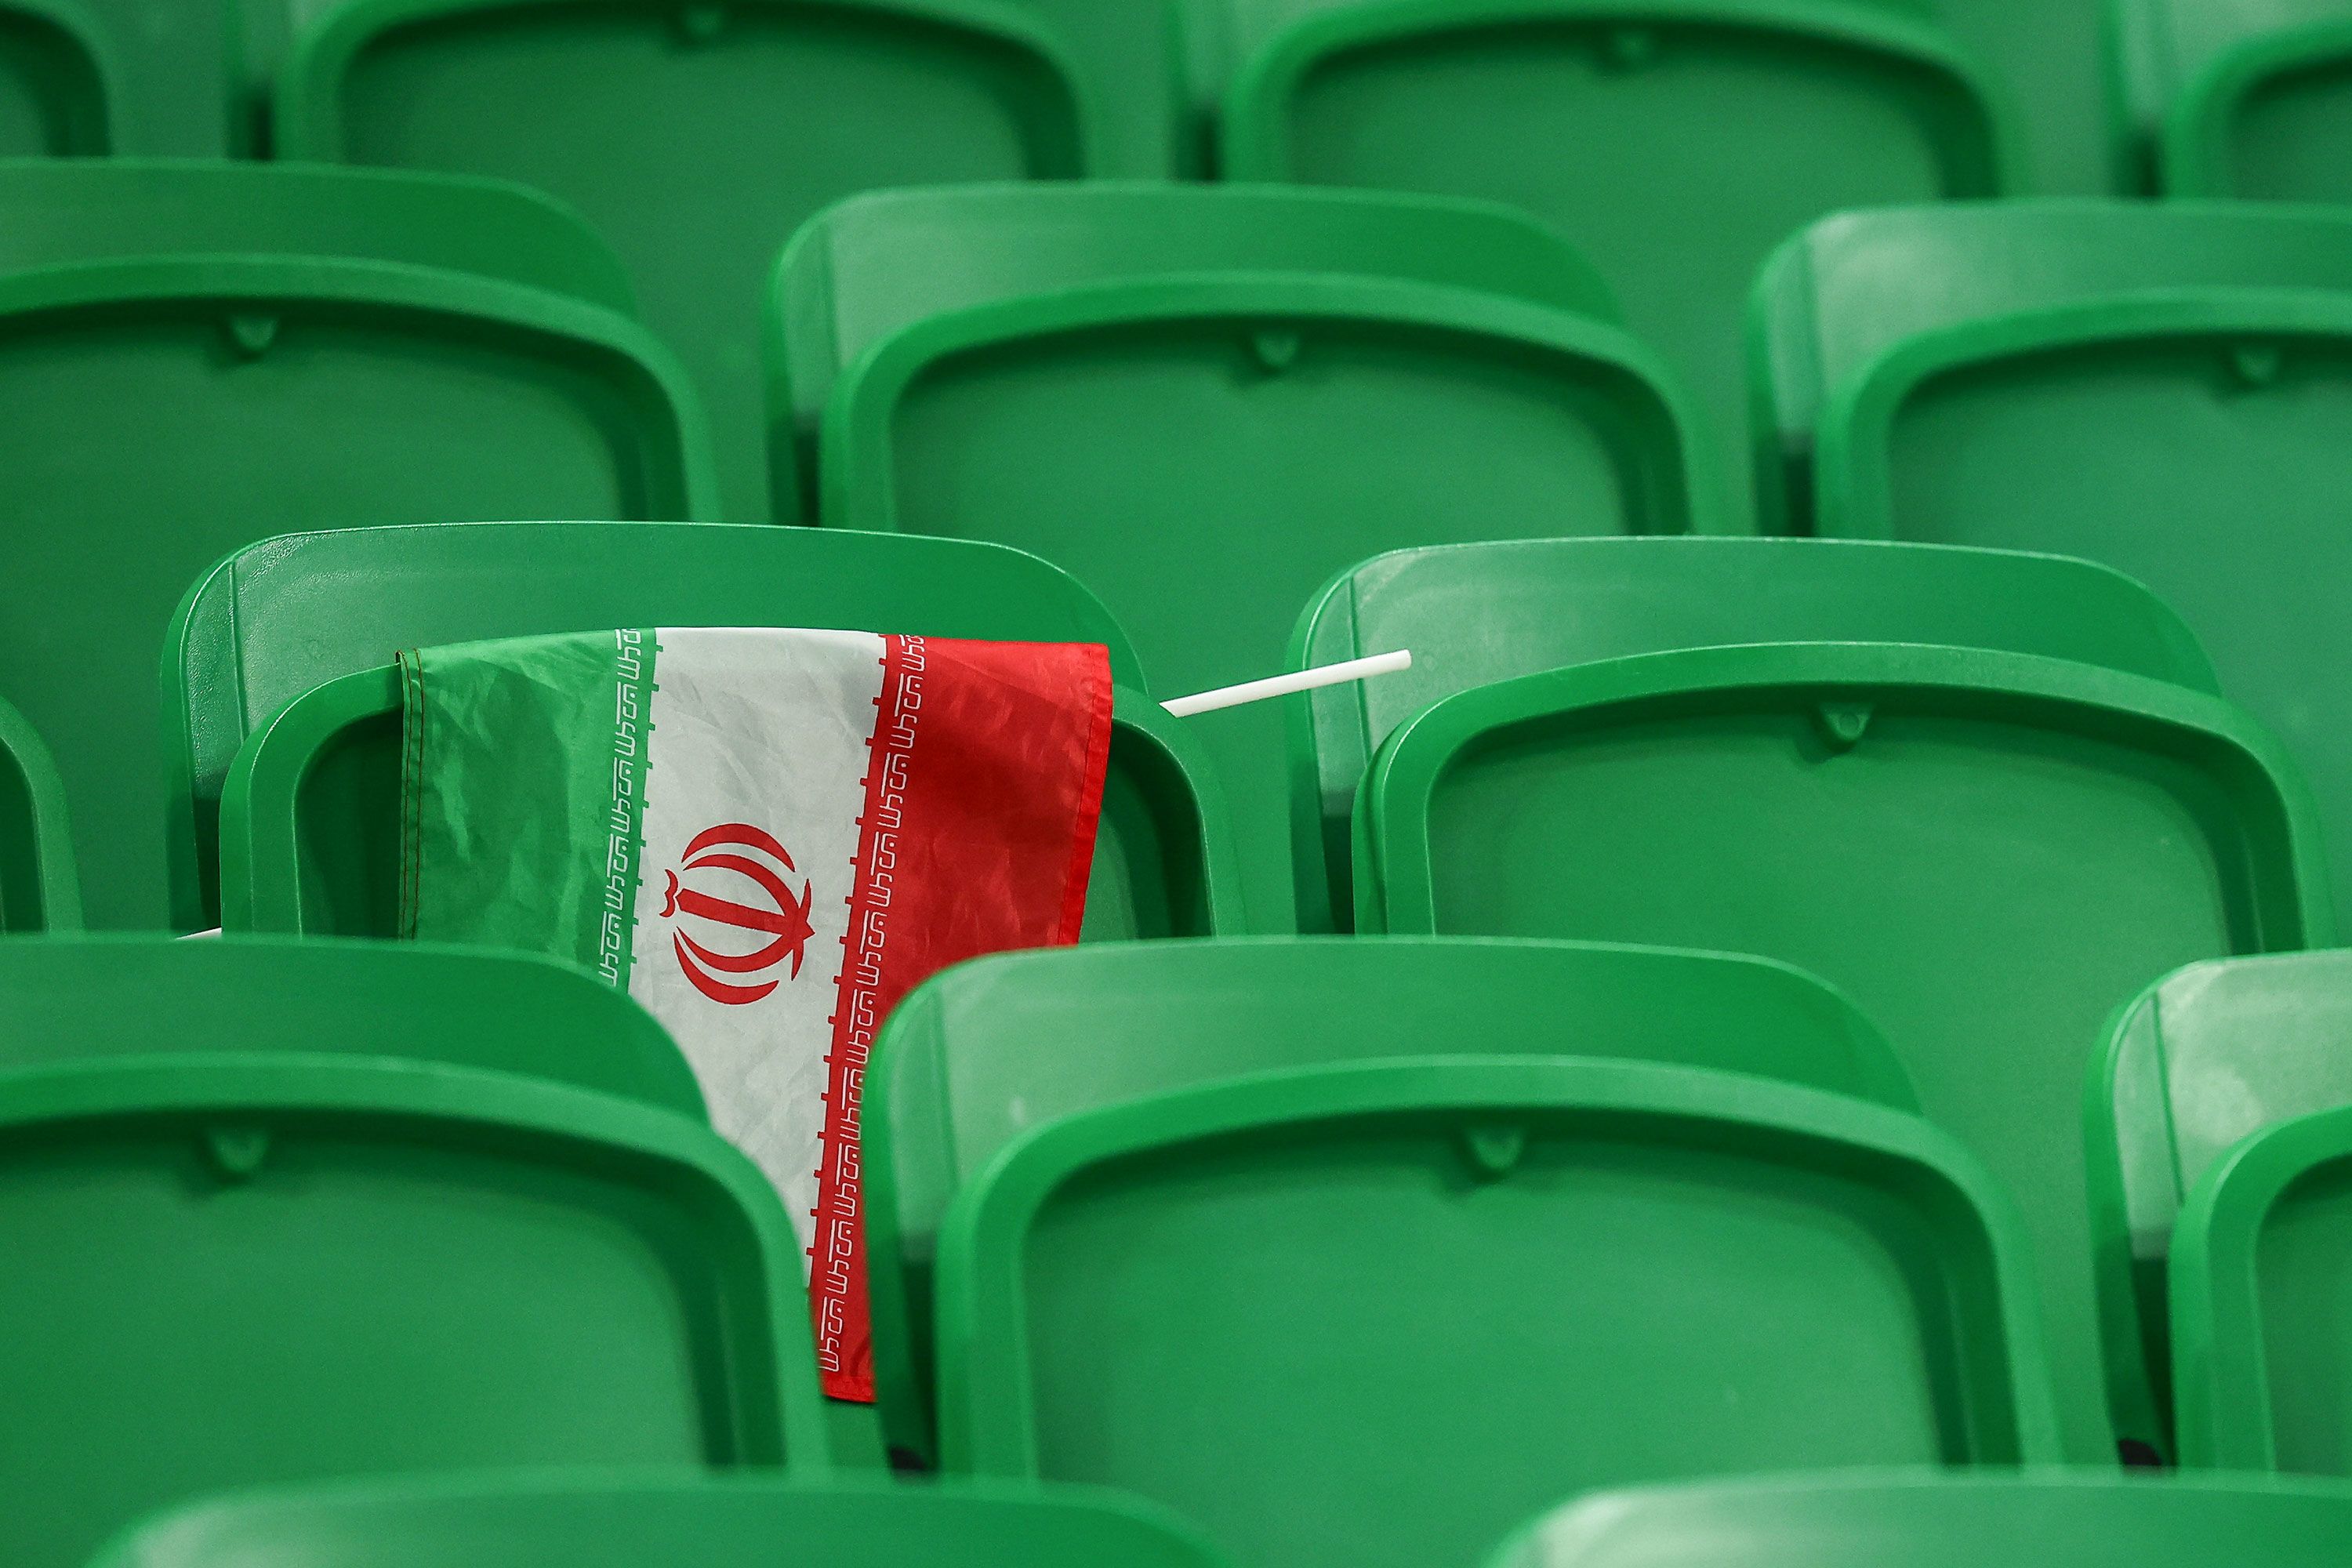 Amir Nasr-Azadani: Soccer union 'sickened' by reports Iranian player faces possible execution | CNN